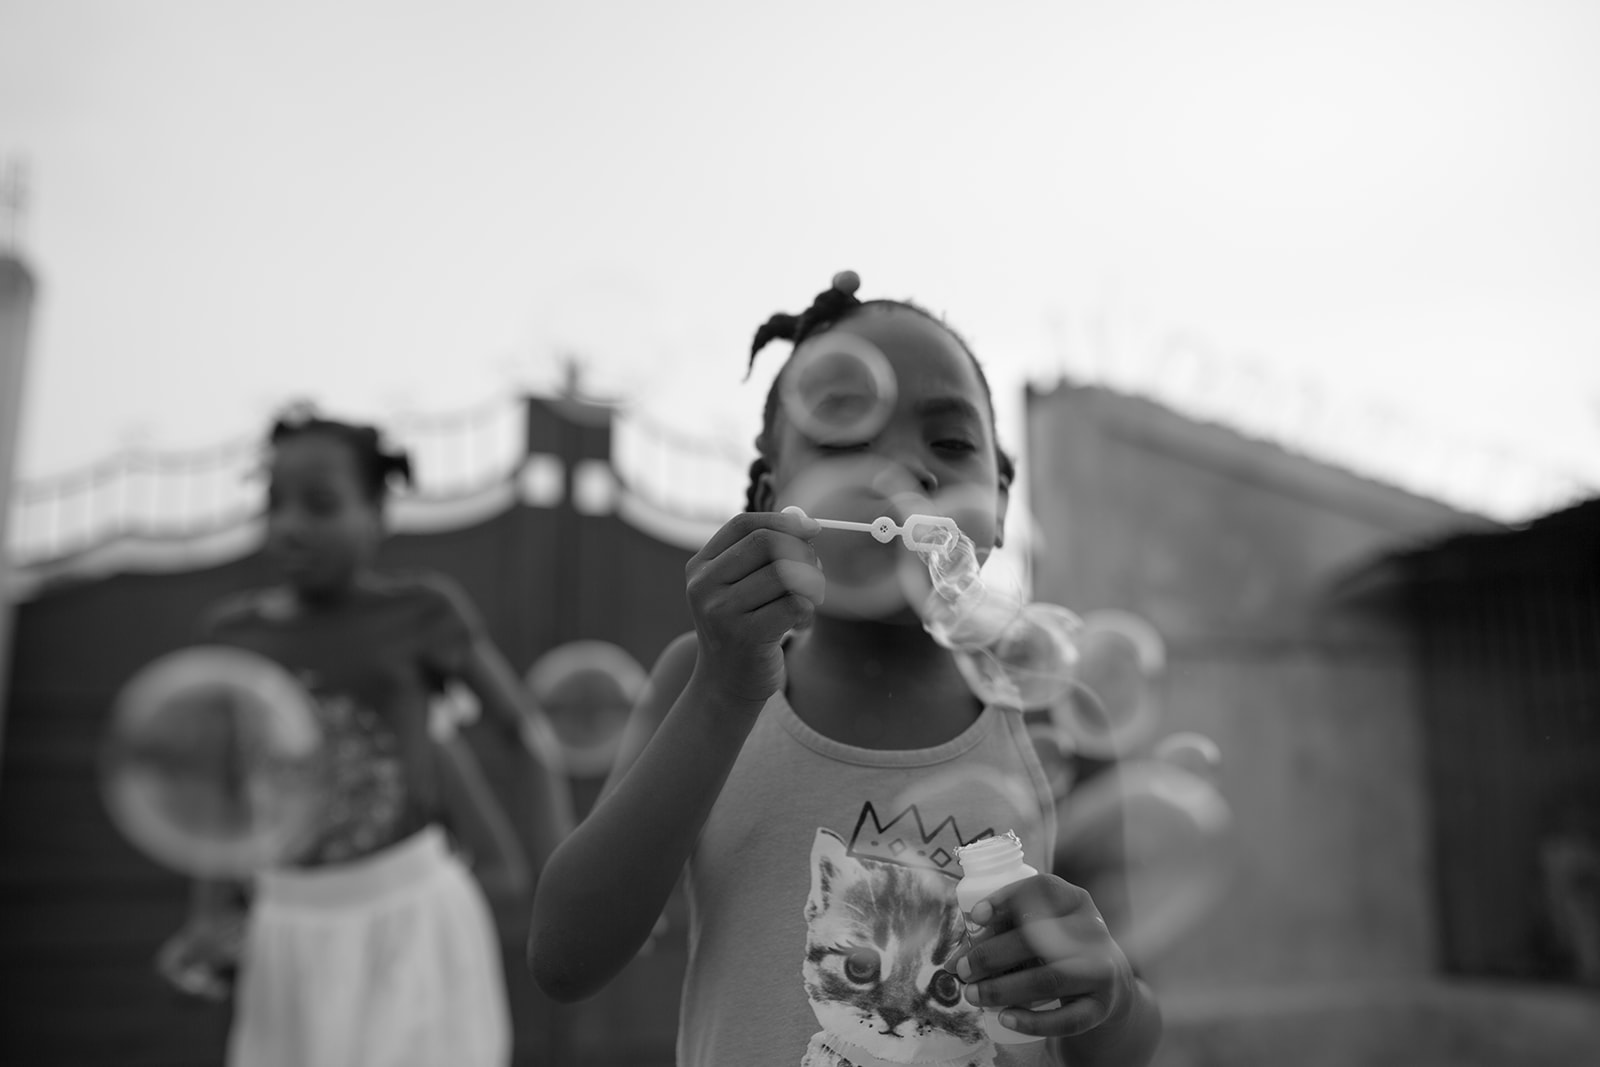 A Haitian child blows bubbles and plays with her friends in Port-au-Prince, Haiti